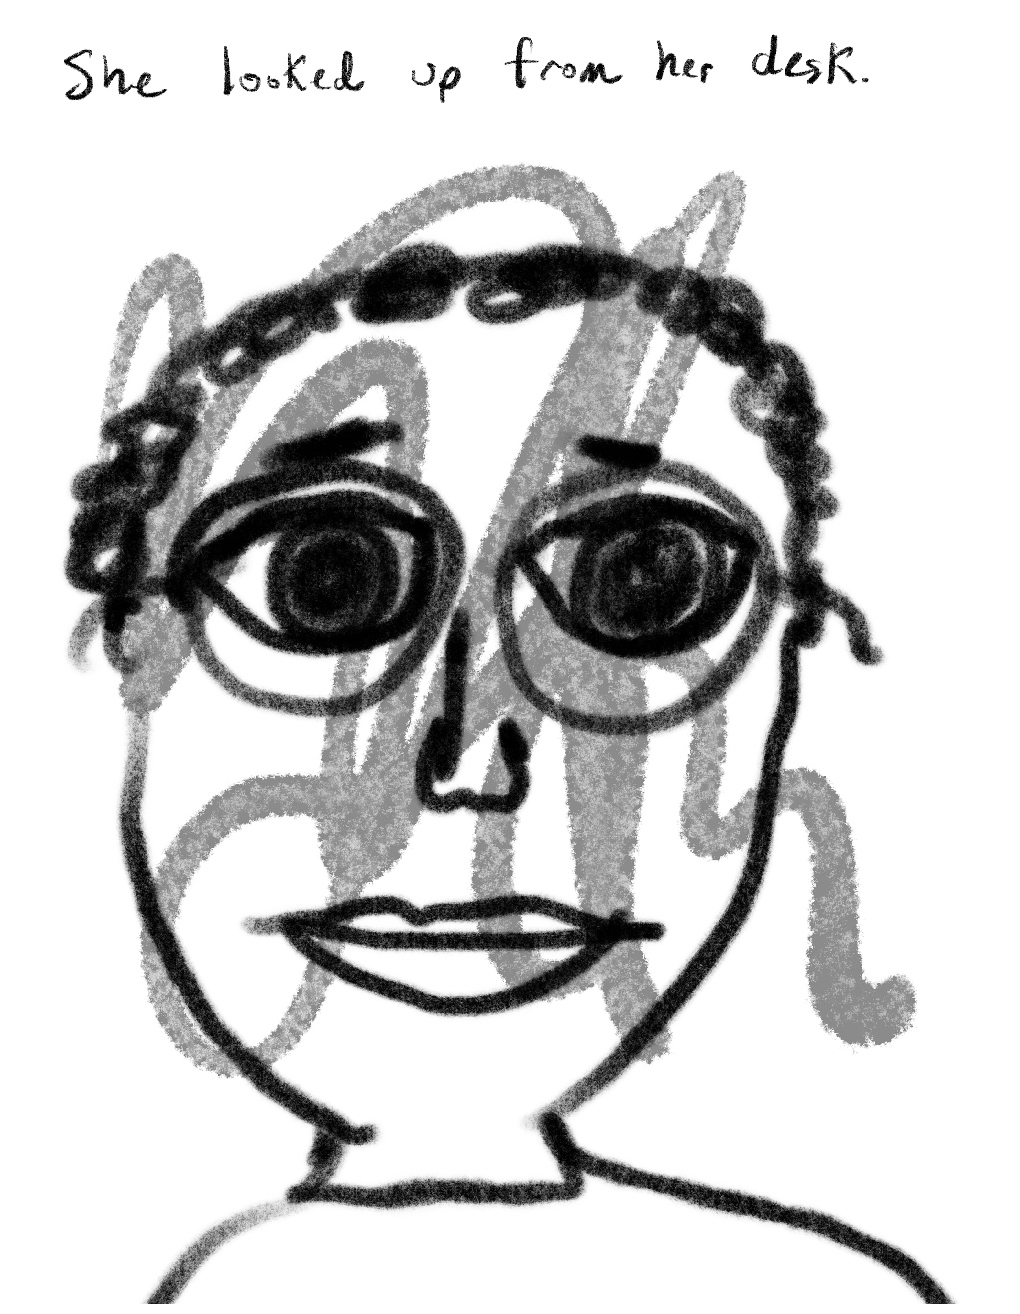 Panel three of a four-panel comic called 'A glimpse of reality', consisting of black line drawing on a white background. The crudely drawn head and shoulders of a figure fill most of the panel. The person has short curly hair, large eyes behind round glasses and a neutral expression. A thick grey line of scribble is painted across most of the face. A line of handwritten text at the very top of the panel reads "She looked up from her desk."